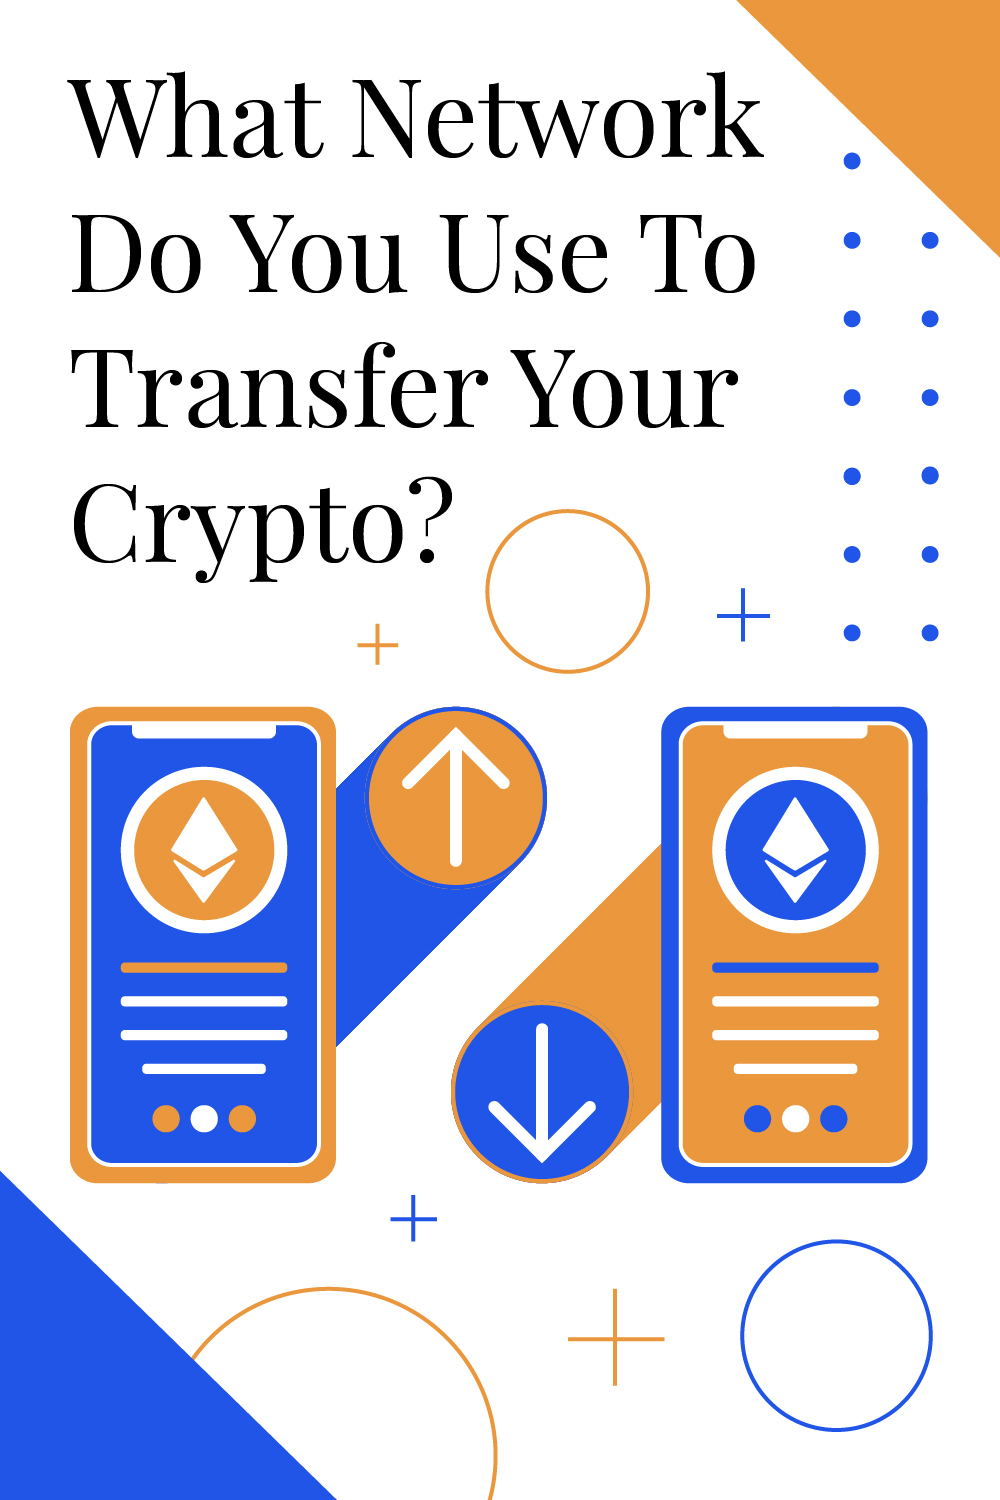 What Network Do You Use To Transfer Your Crypto?